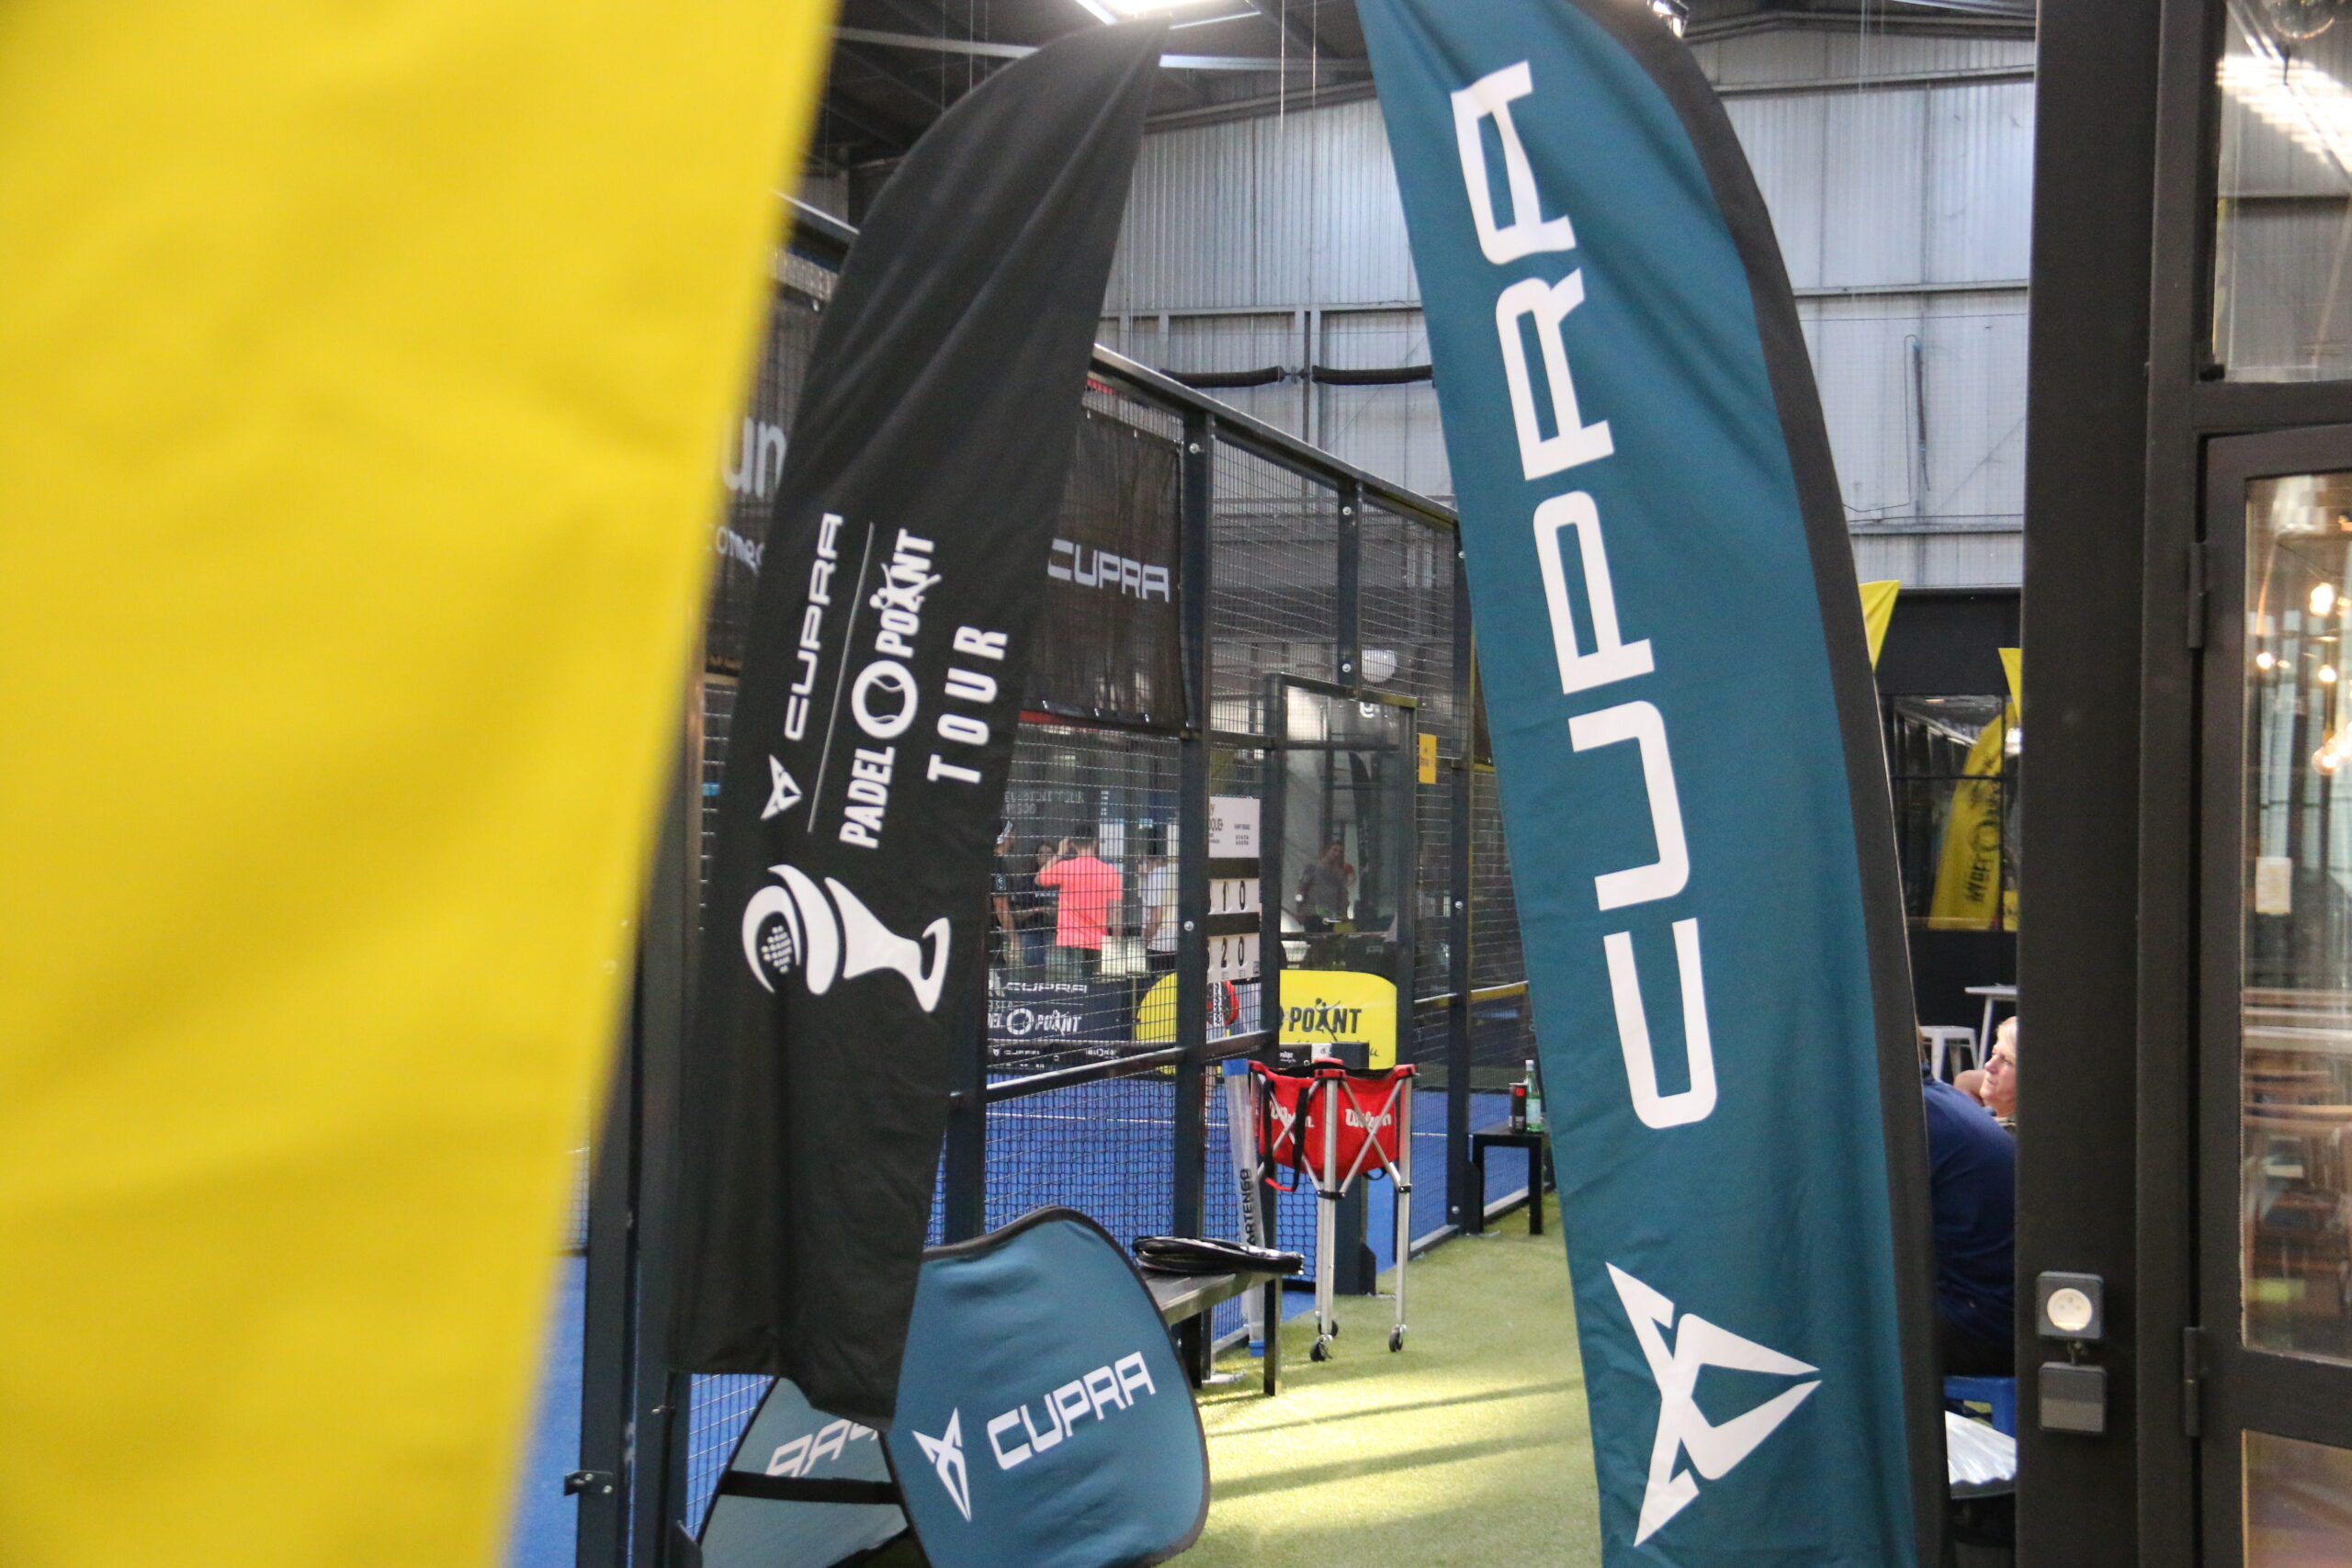 Cupra Padel-Point Tour Caen, the point on the first day!